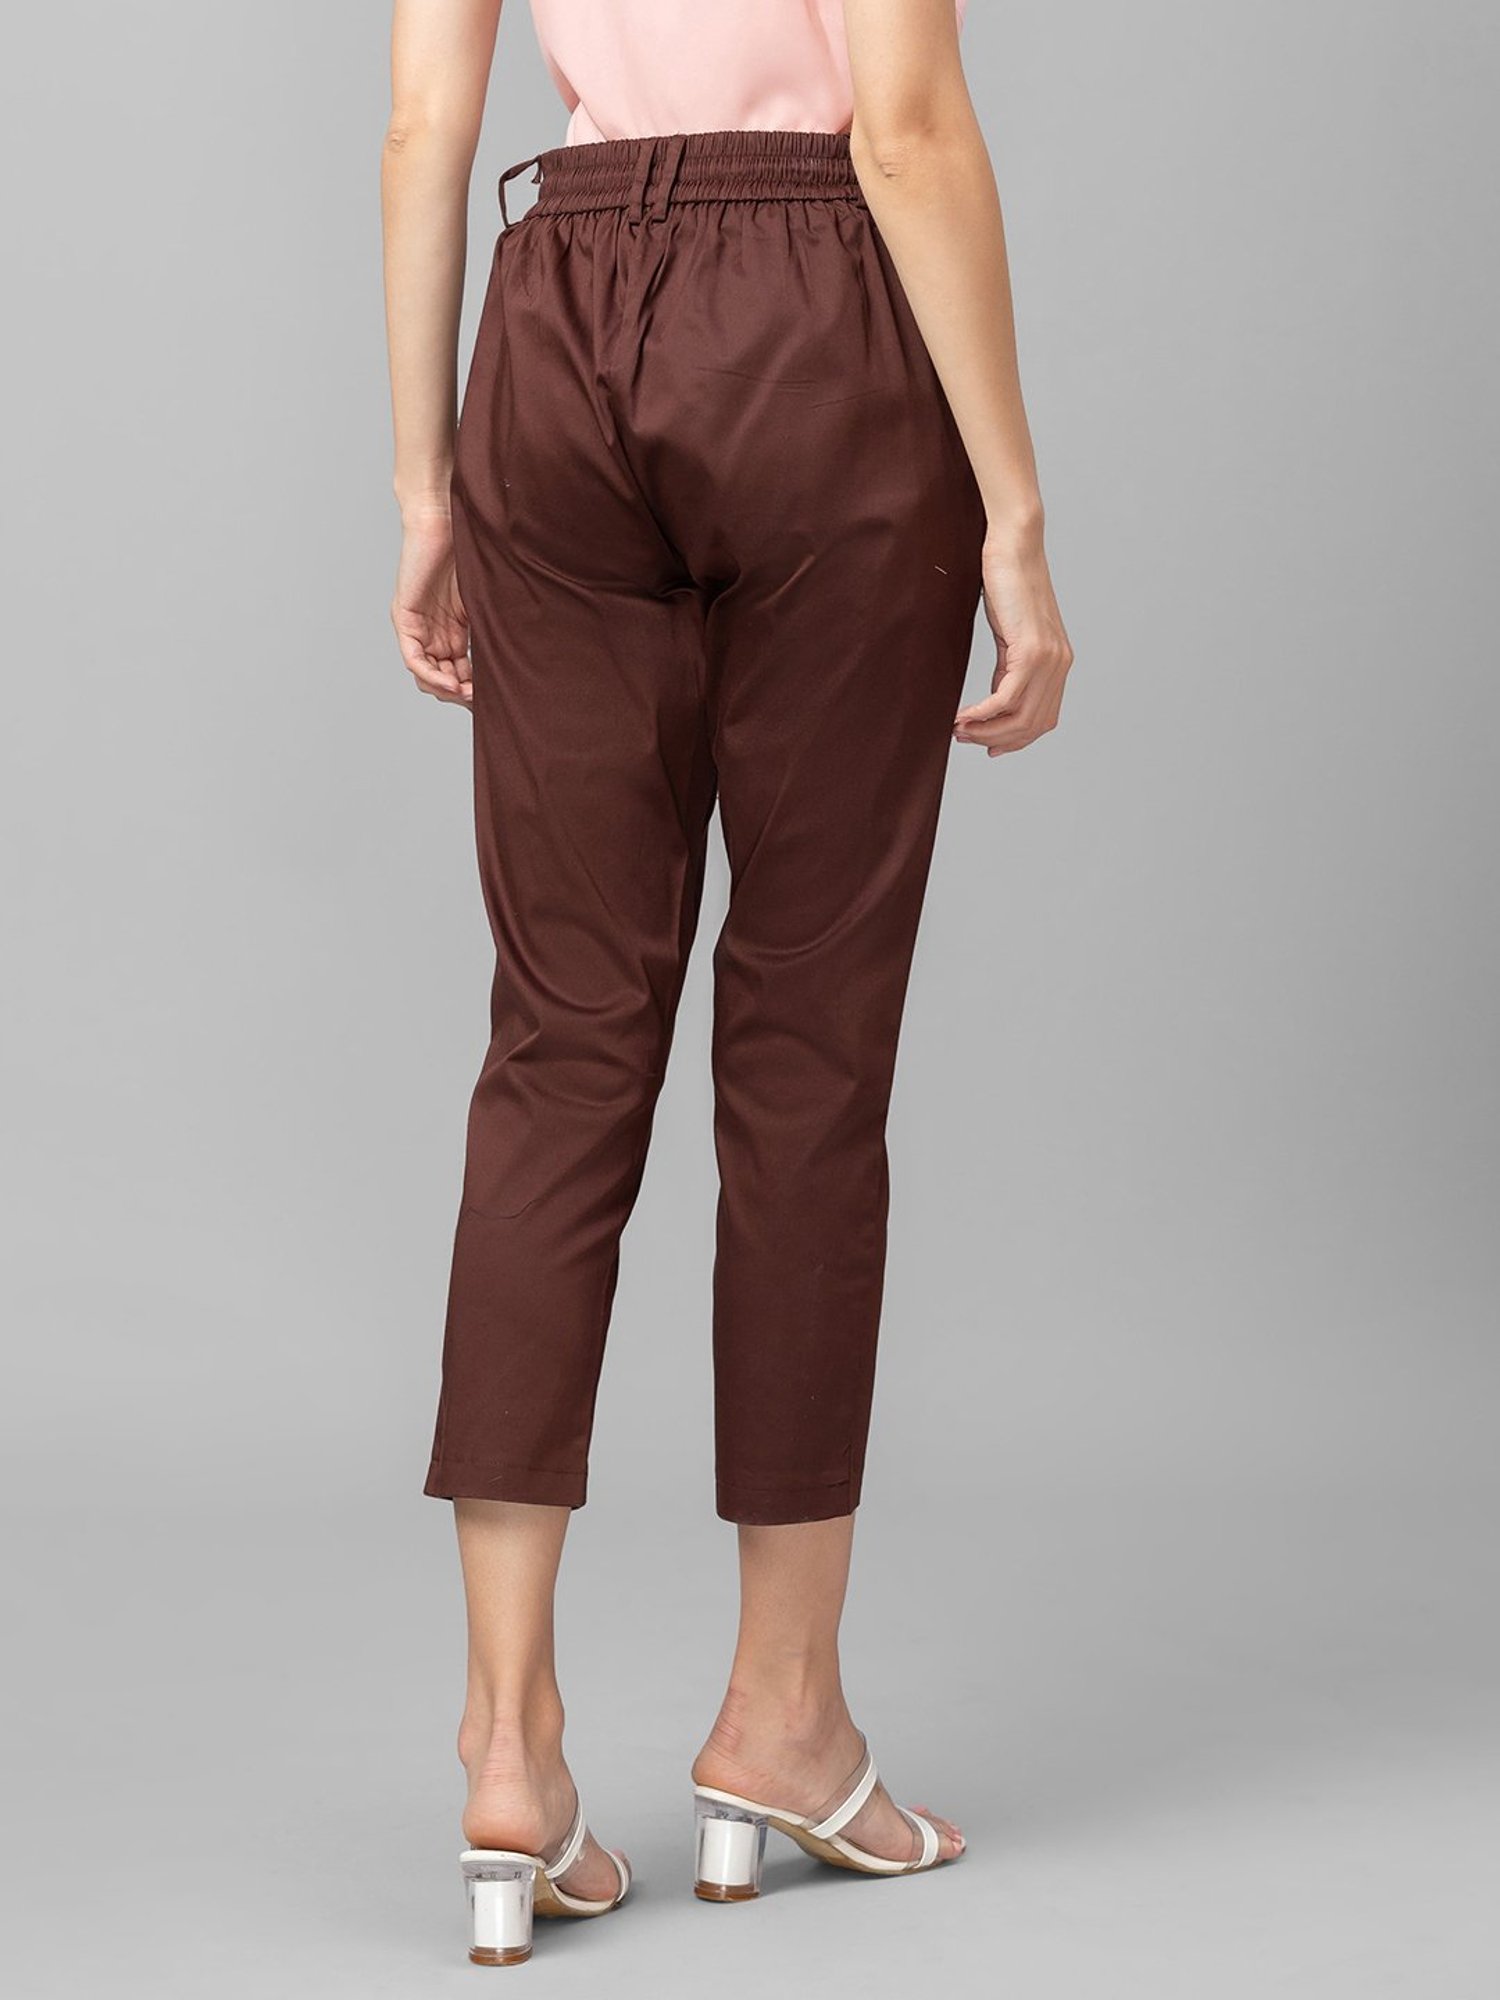 Kin Plain Cropped Slim Fit Tailored Trousers Brown 6